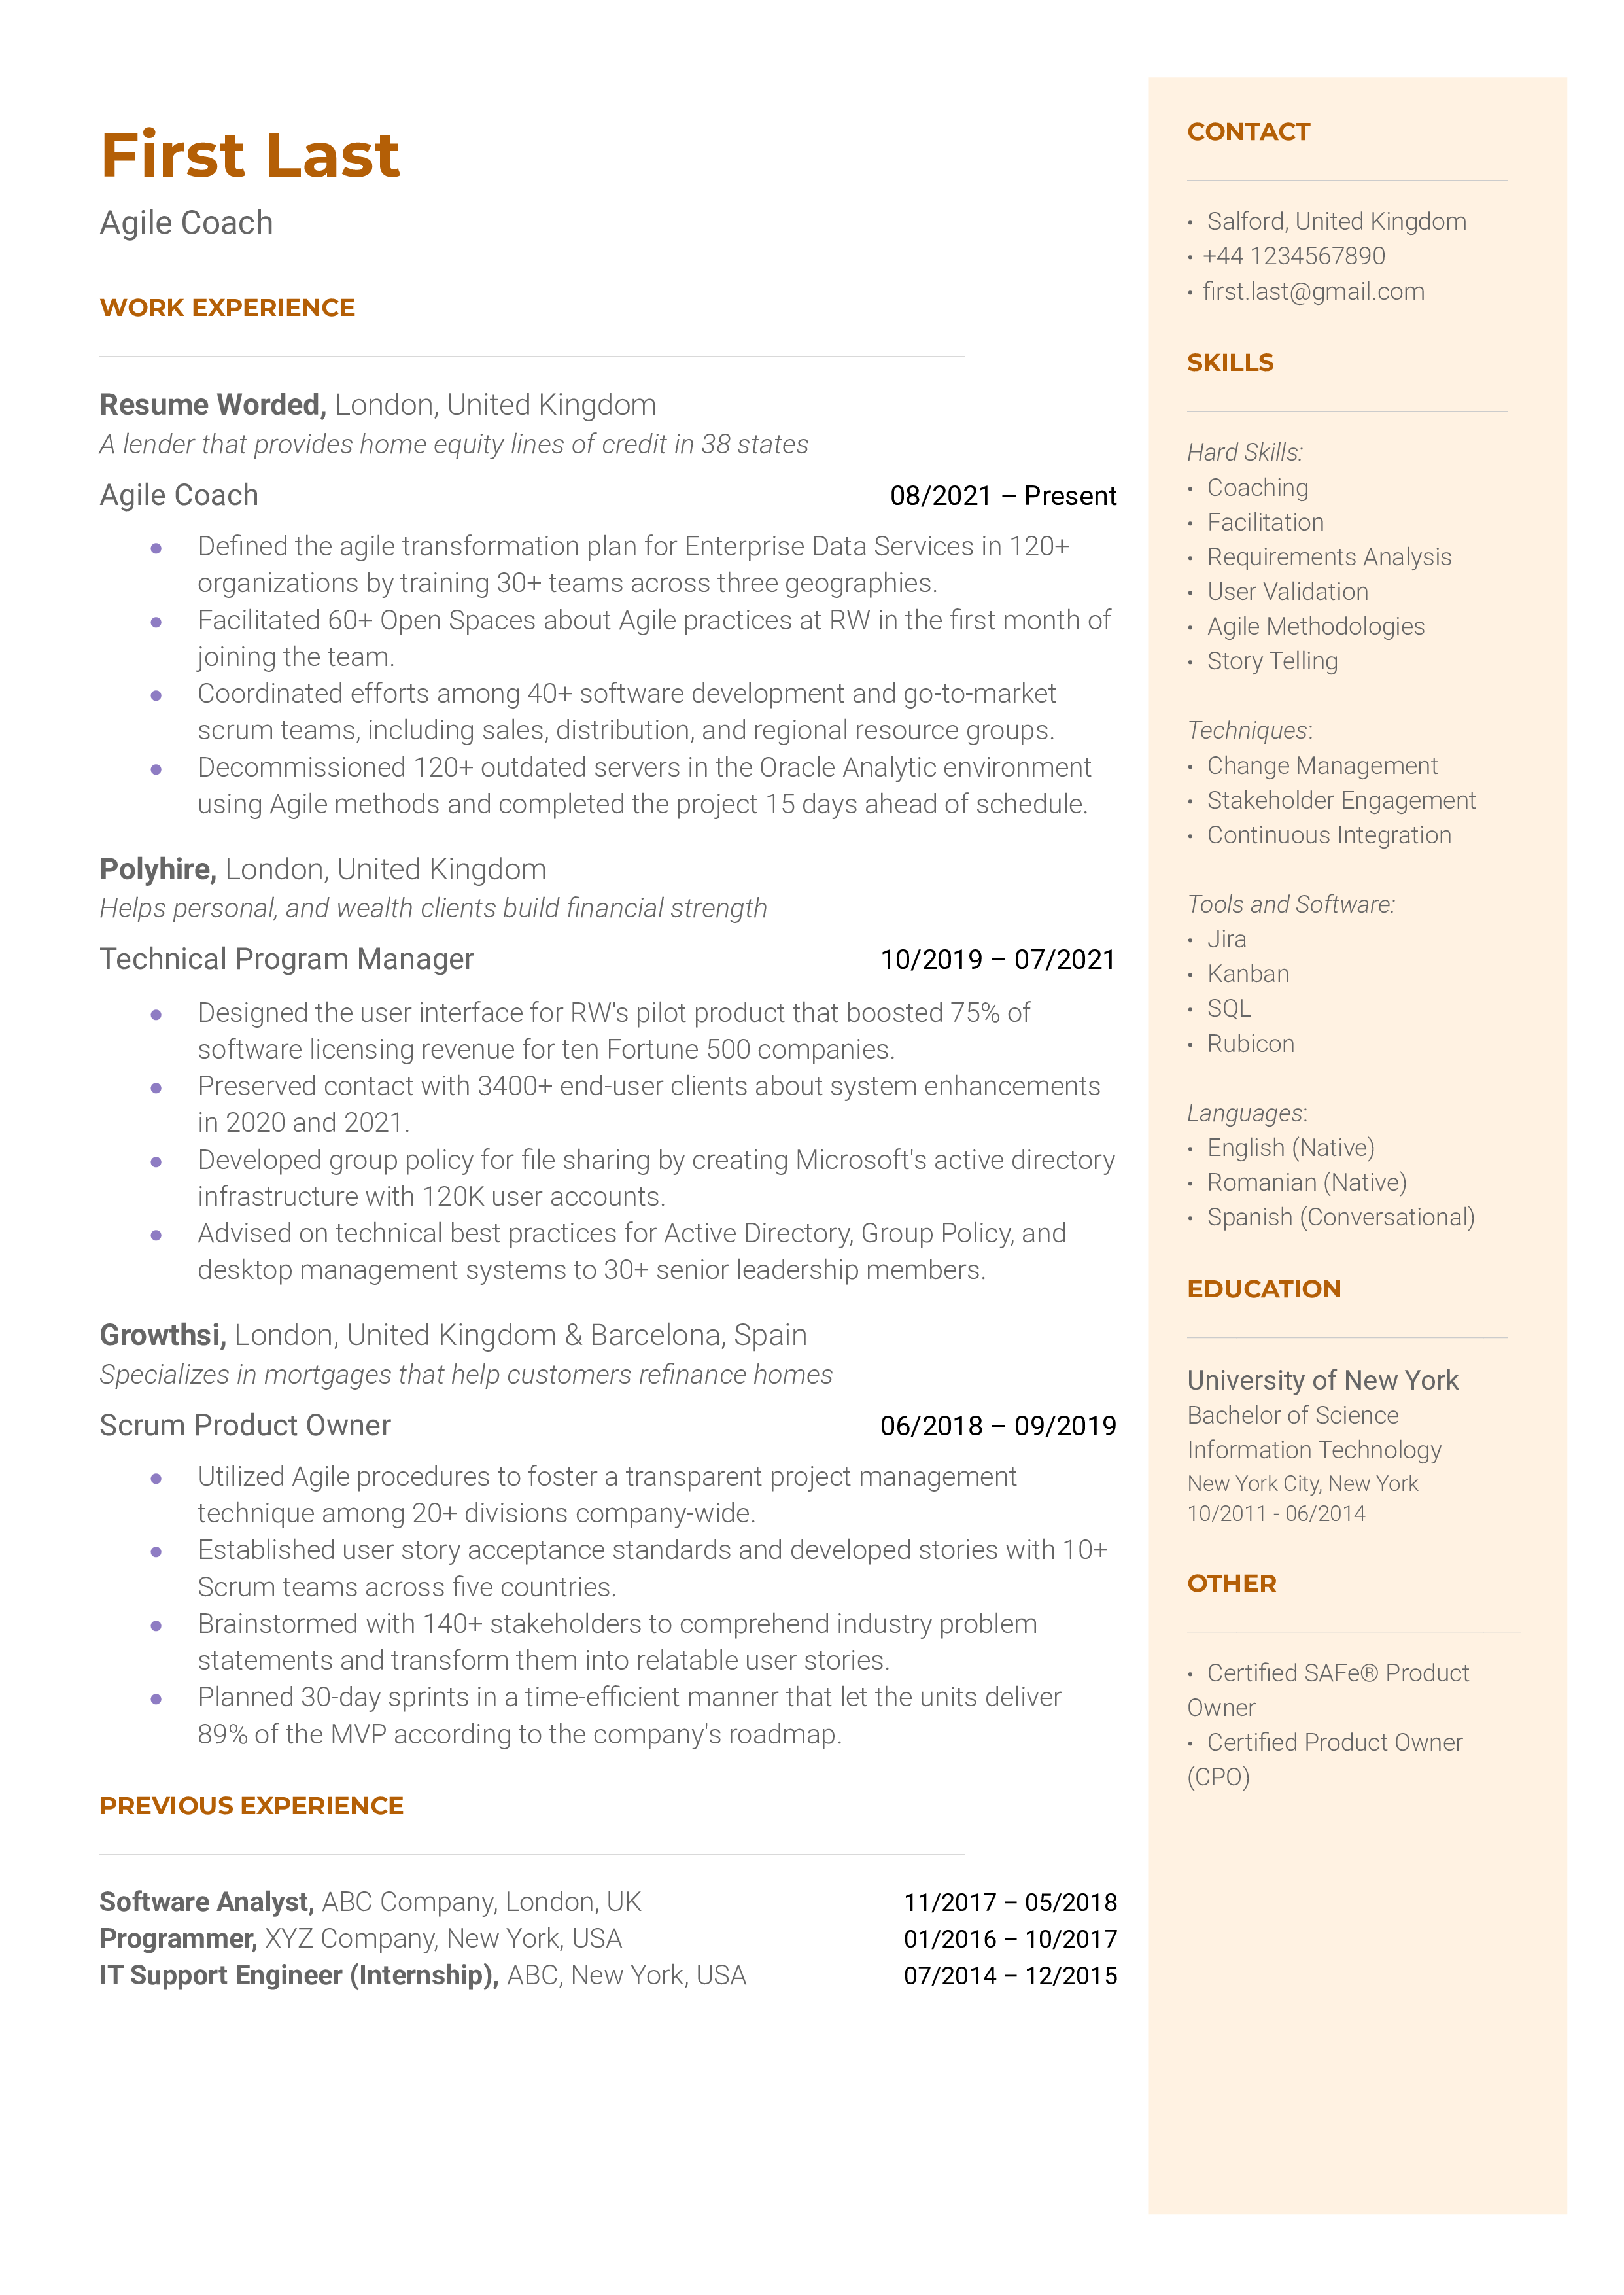 An Agile coach resume template including tools and relevant software.